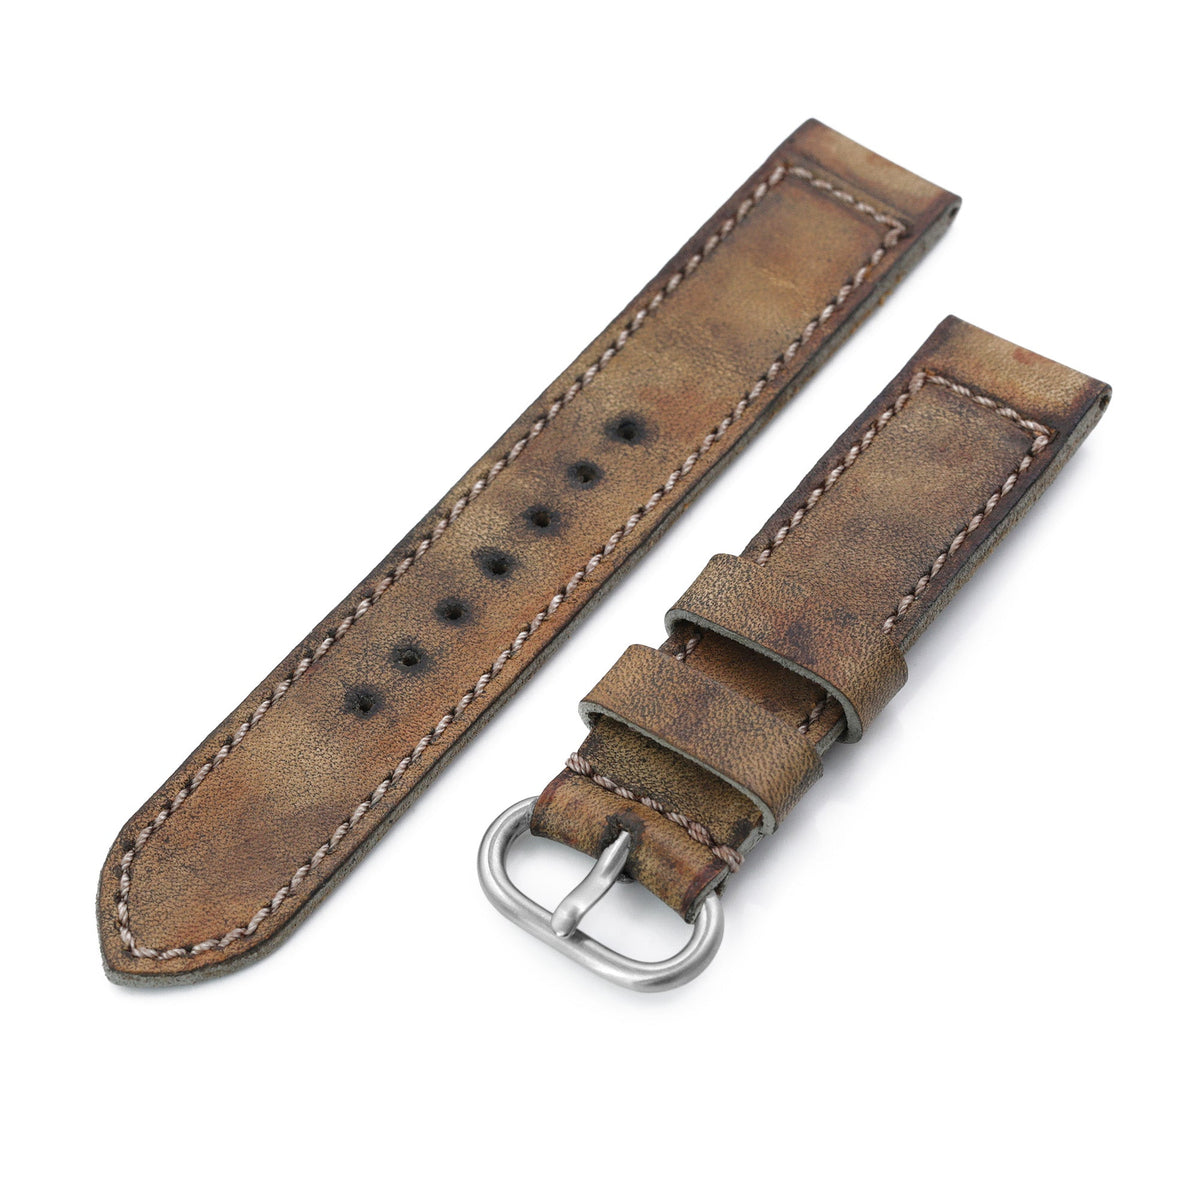 20mm Gunny X MT MISSION POSSIBLE 1 (MP1) Series Vintage Brown Leather Watch Strap Strapcode Watch Bands